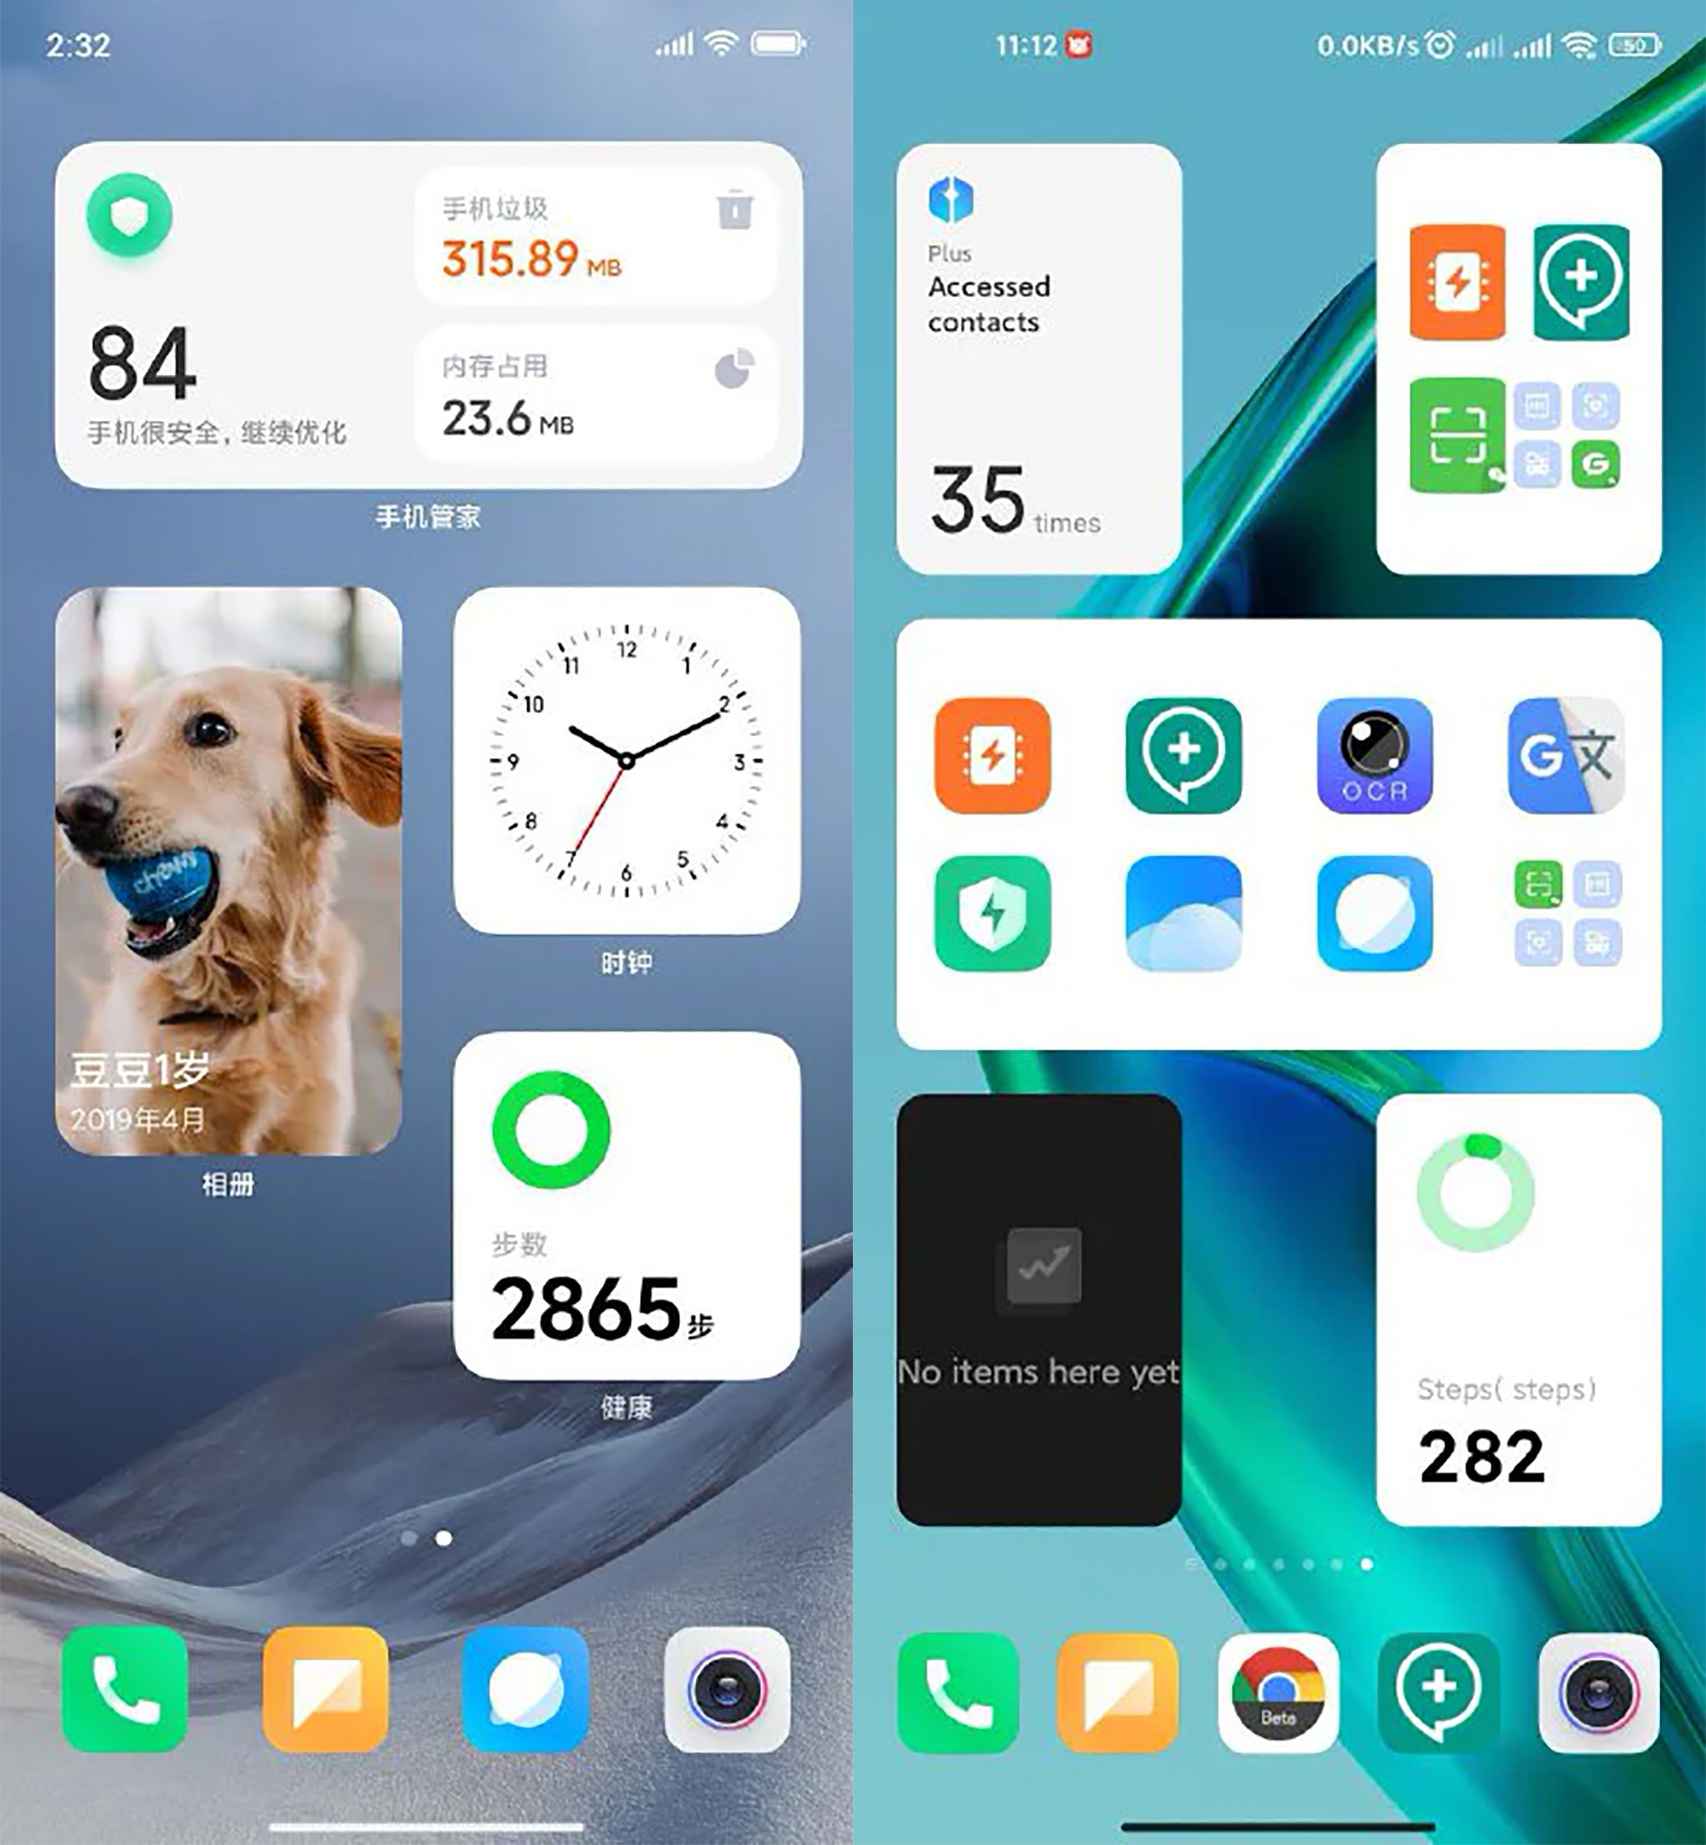 These are the MIUI IOS type widgets